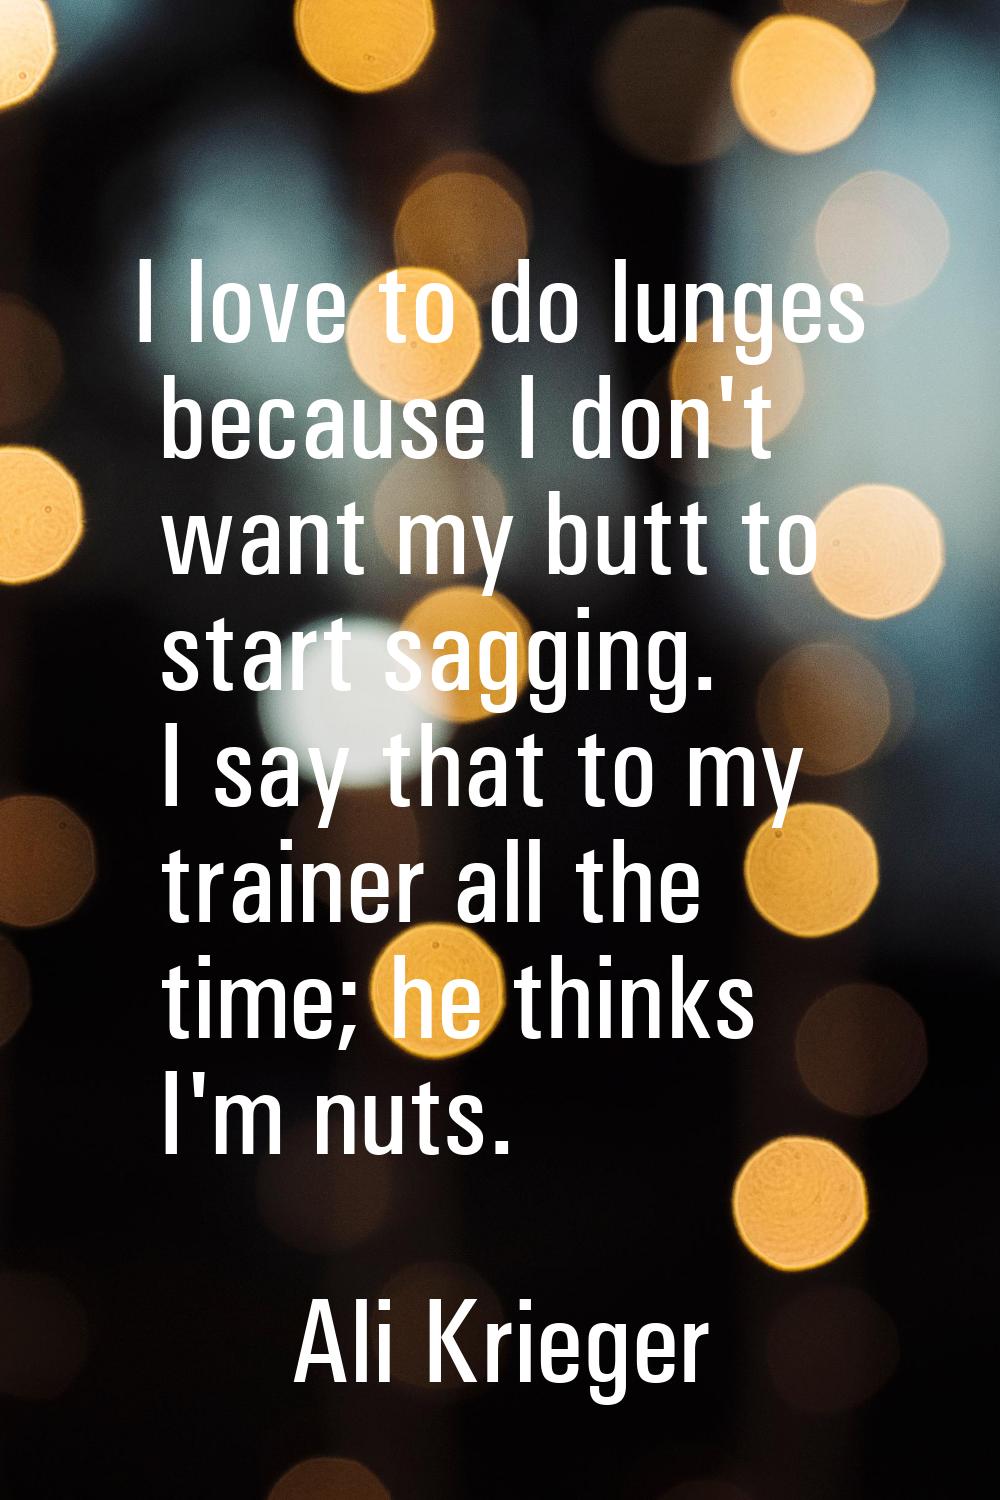 I love to do lunges because I don't want my butt to start sagging. I say that to my trainer all the